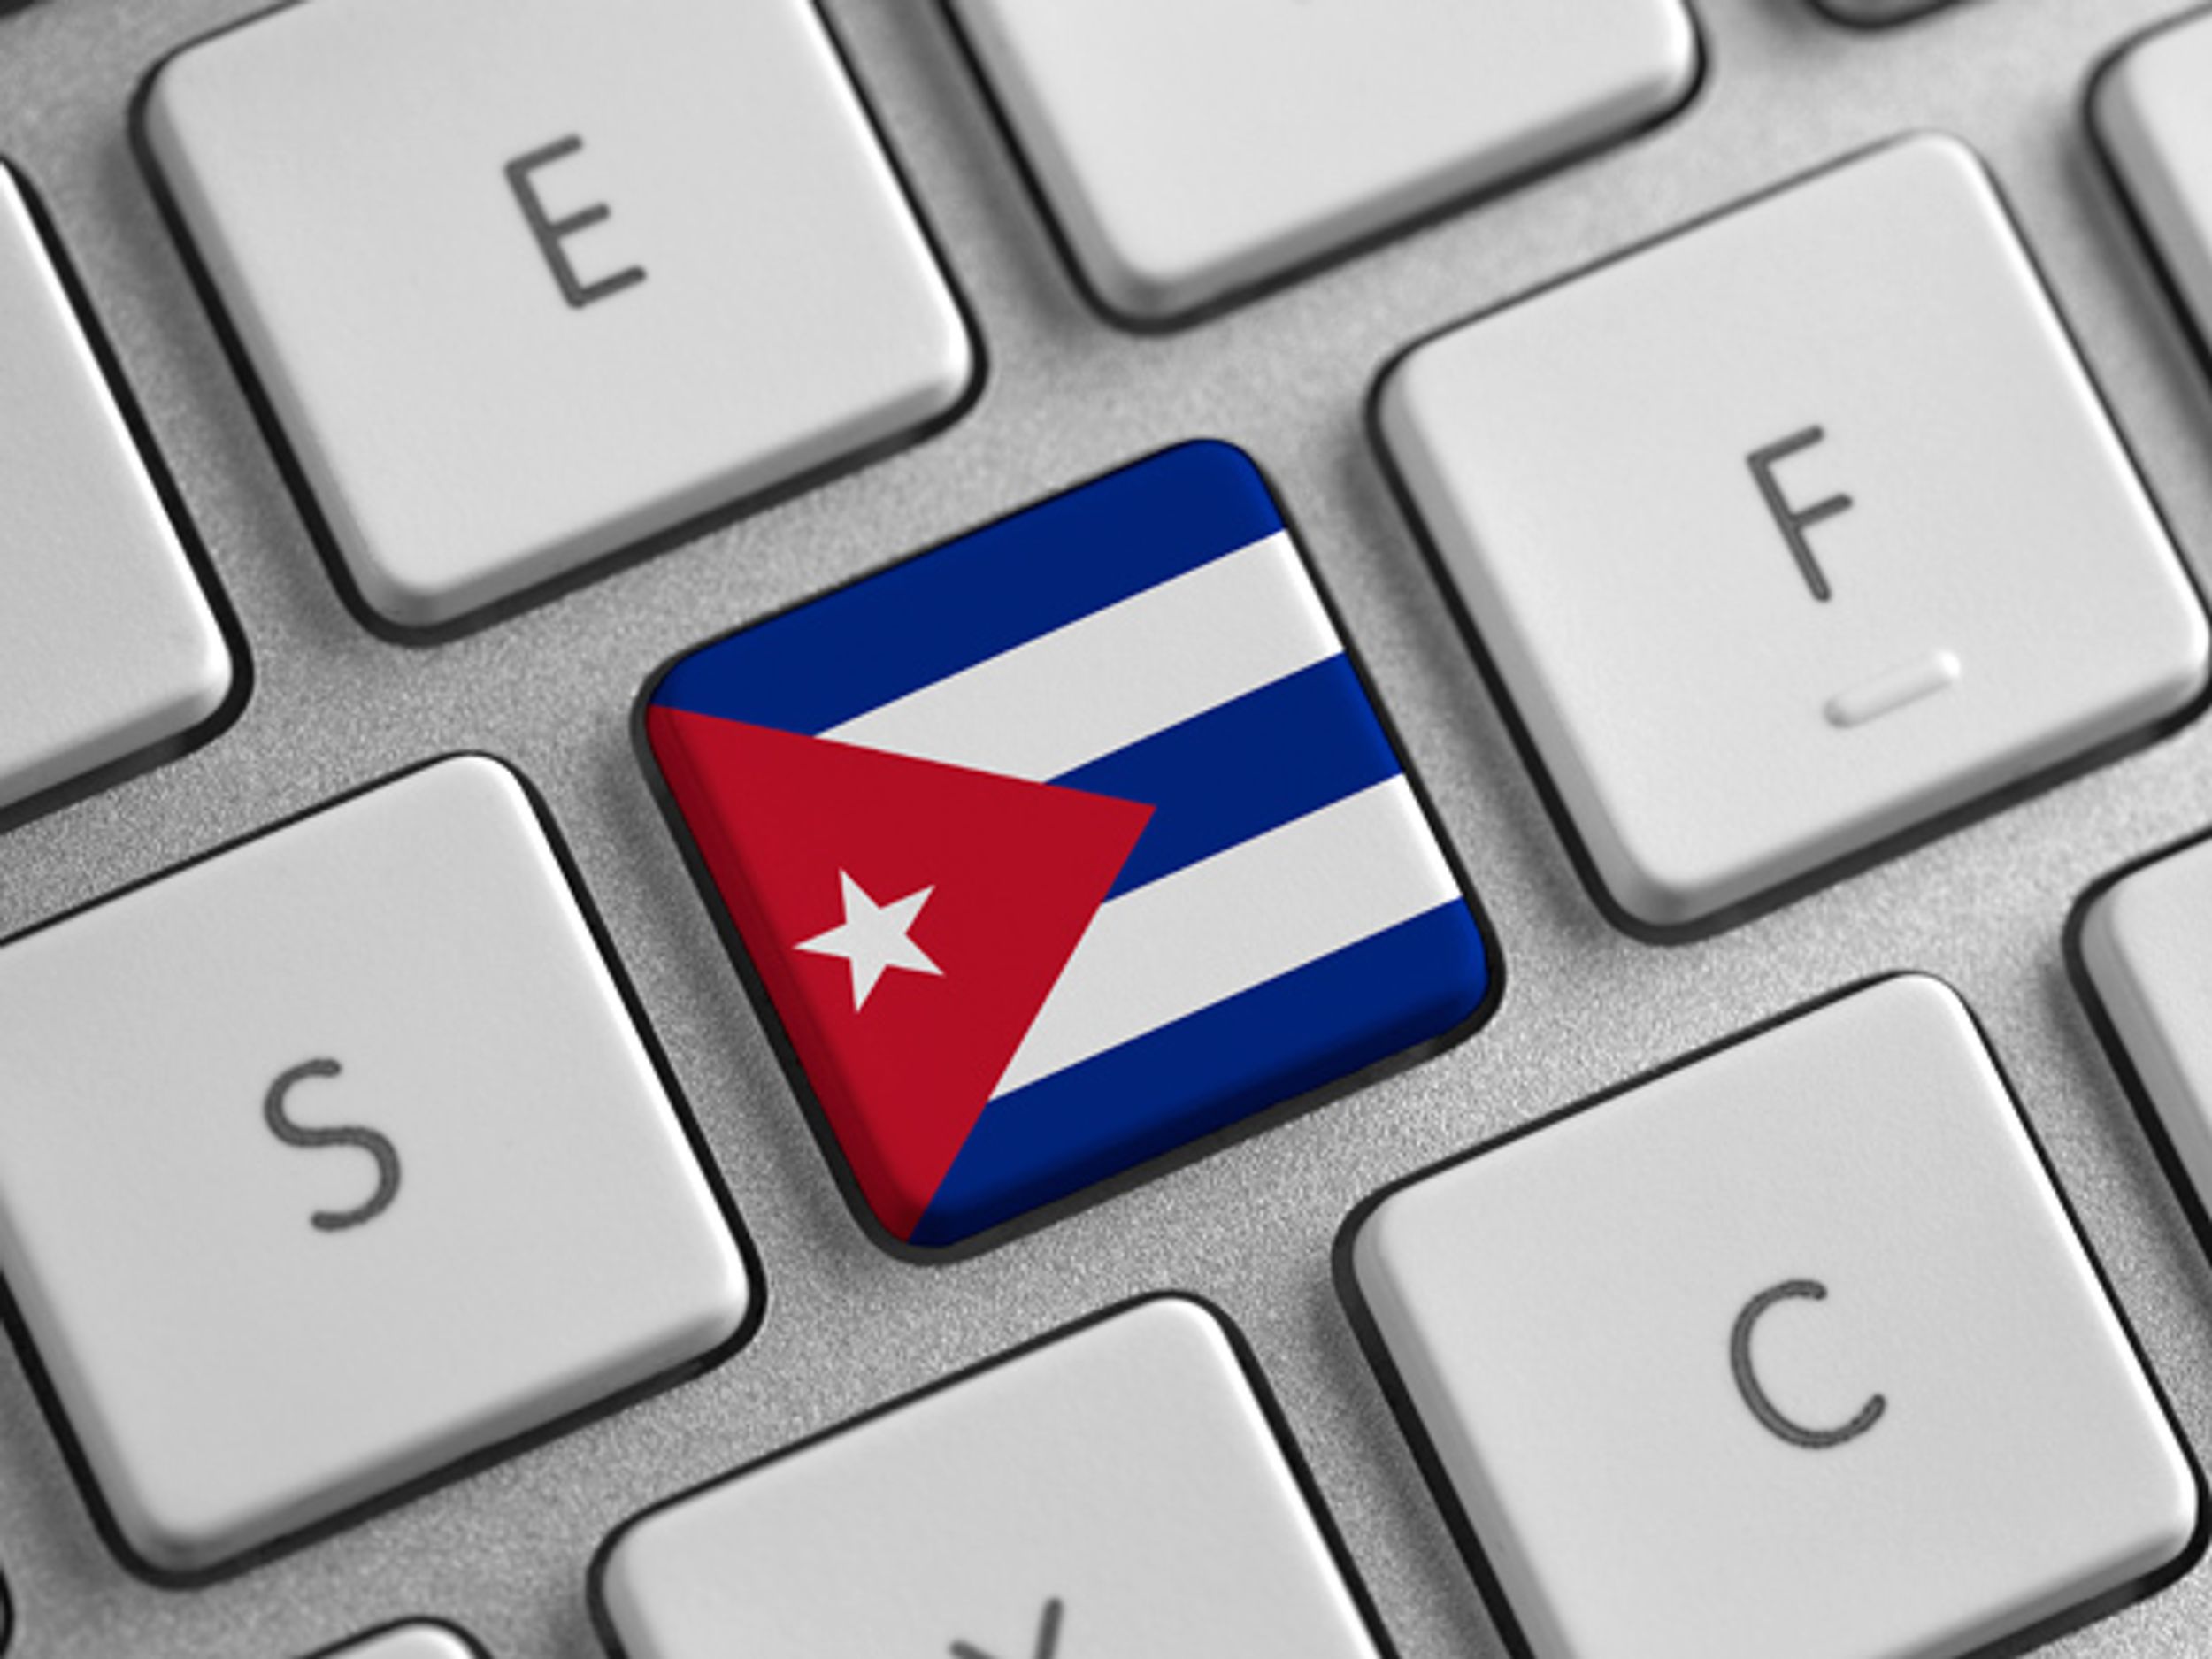 Silicon Valley Gets Ready to Code for Cuba